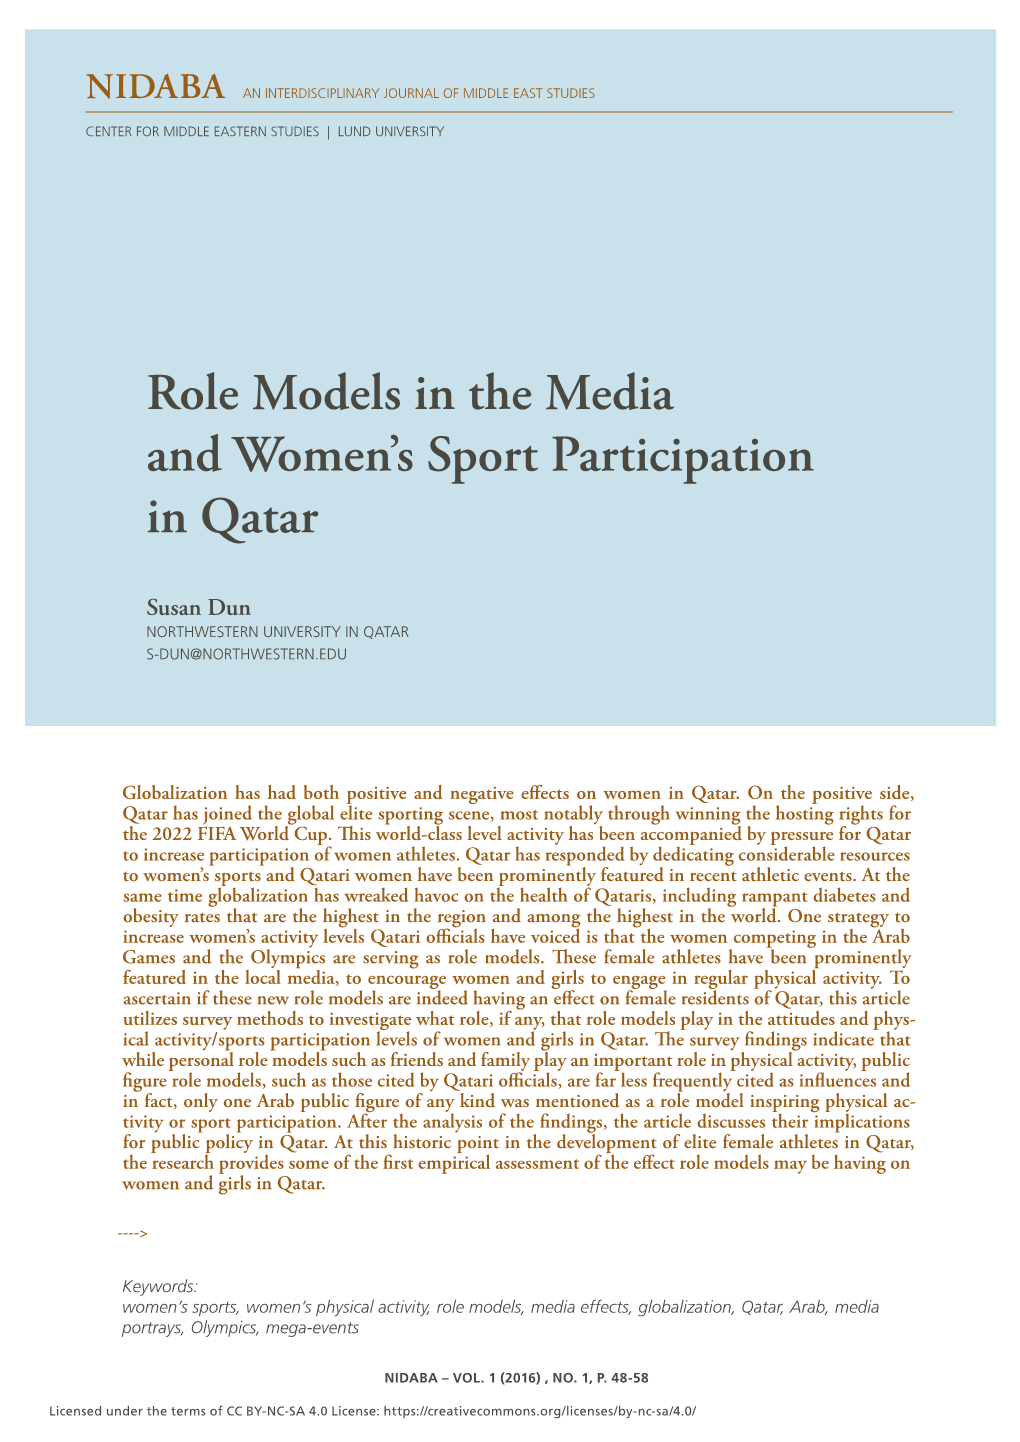 Role Models in the Media and Women's Sport Participation in Qatar